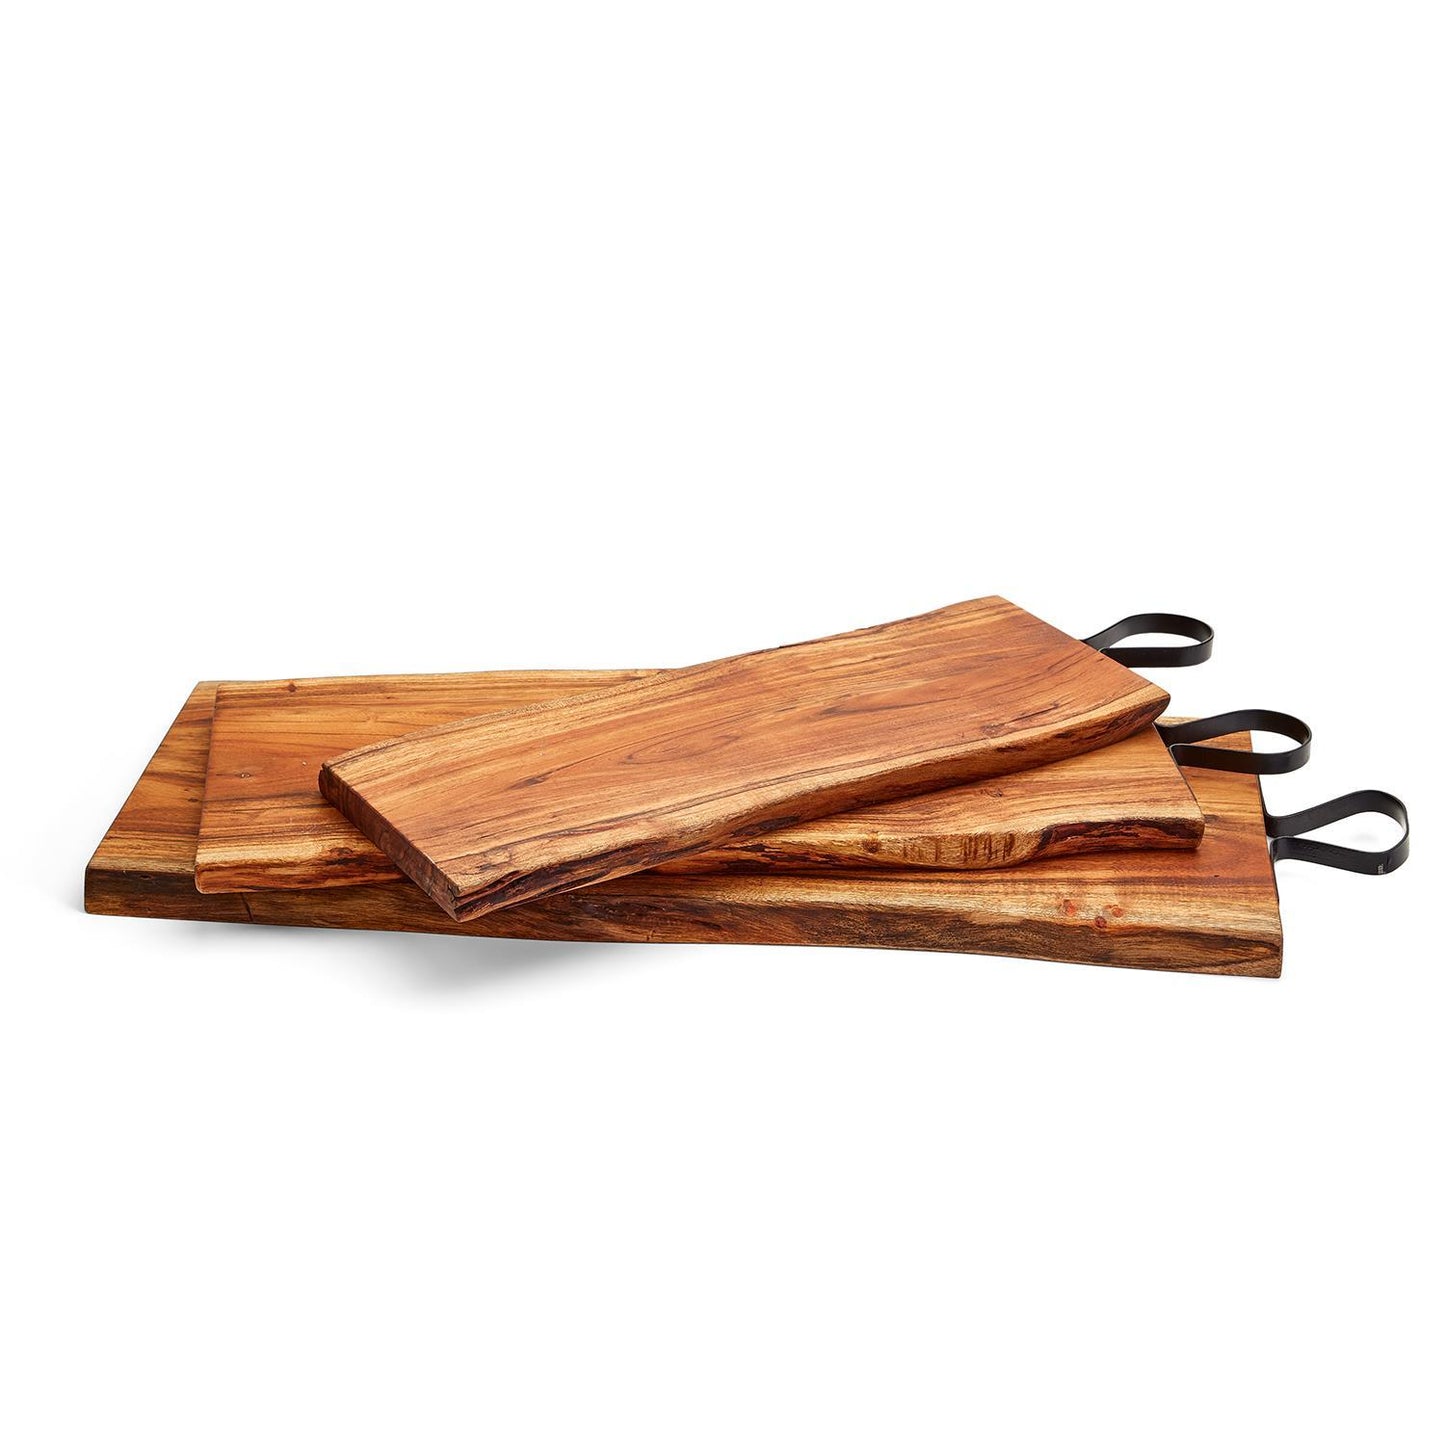 Live Edge Artisanal Acacia Wood Cutting and Charcuterie Long Board with Iron Handle - Mellow Monkey